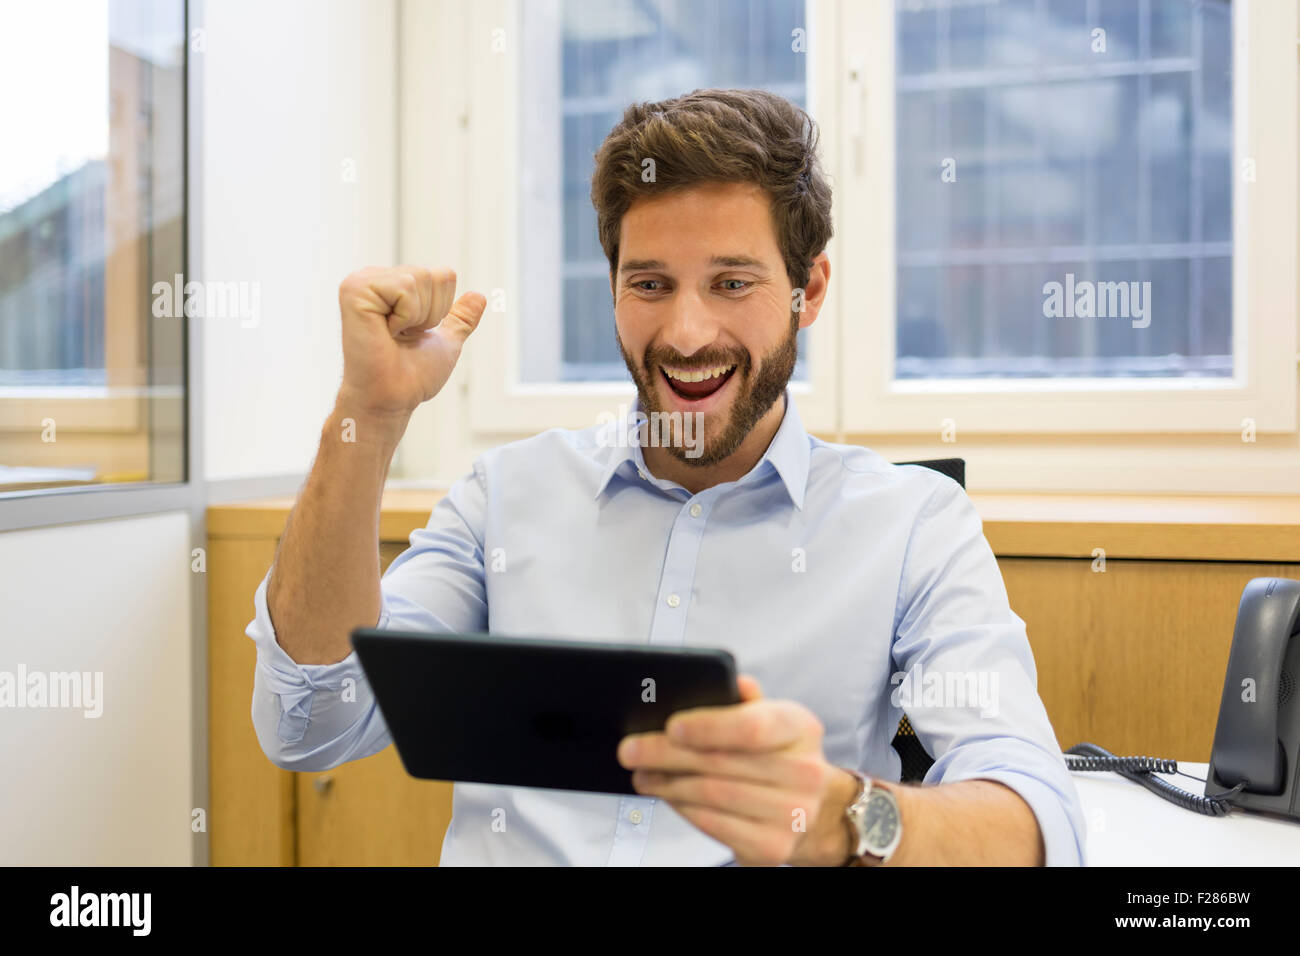 Cheering businessman with arms up in office using digital tablet Stock Photo